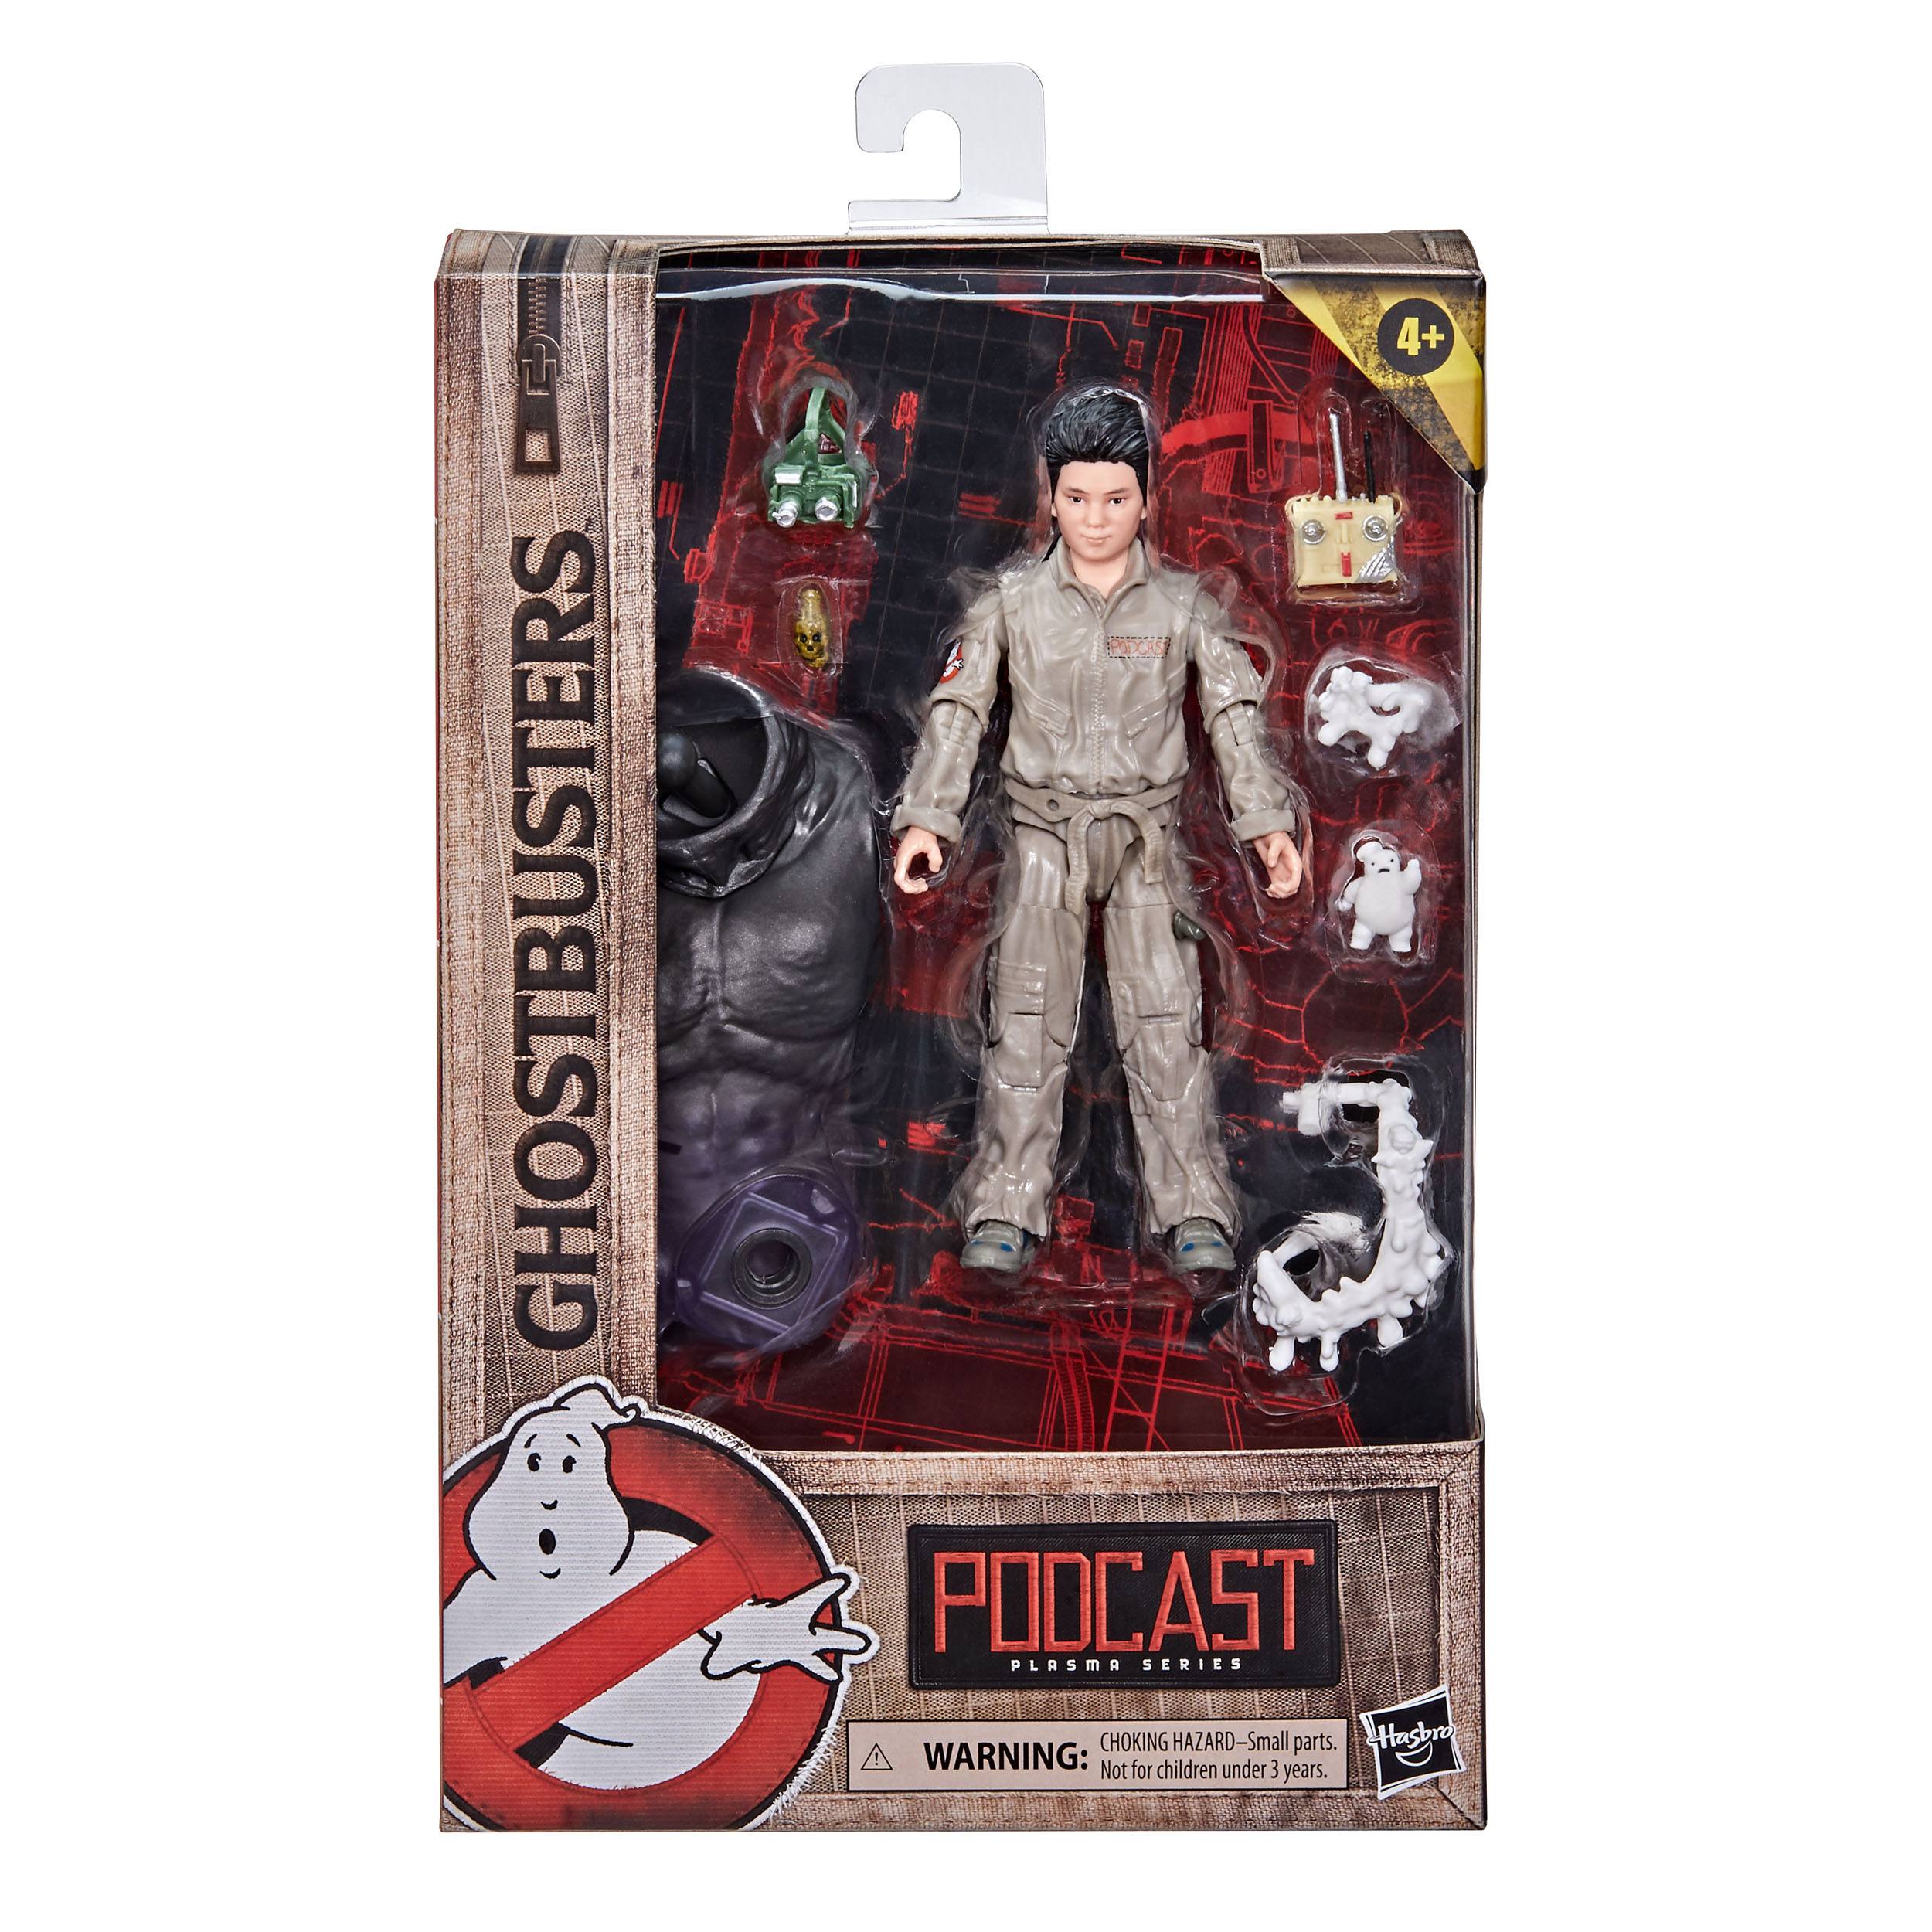 Ghostbusters Plasma Series Ghostbusters: Afterlife Podcast  5010993853274